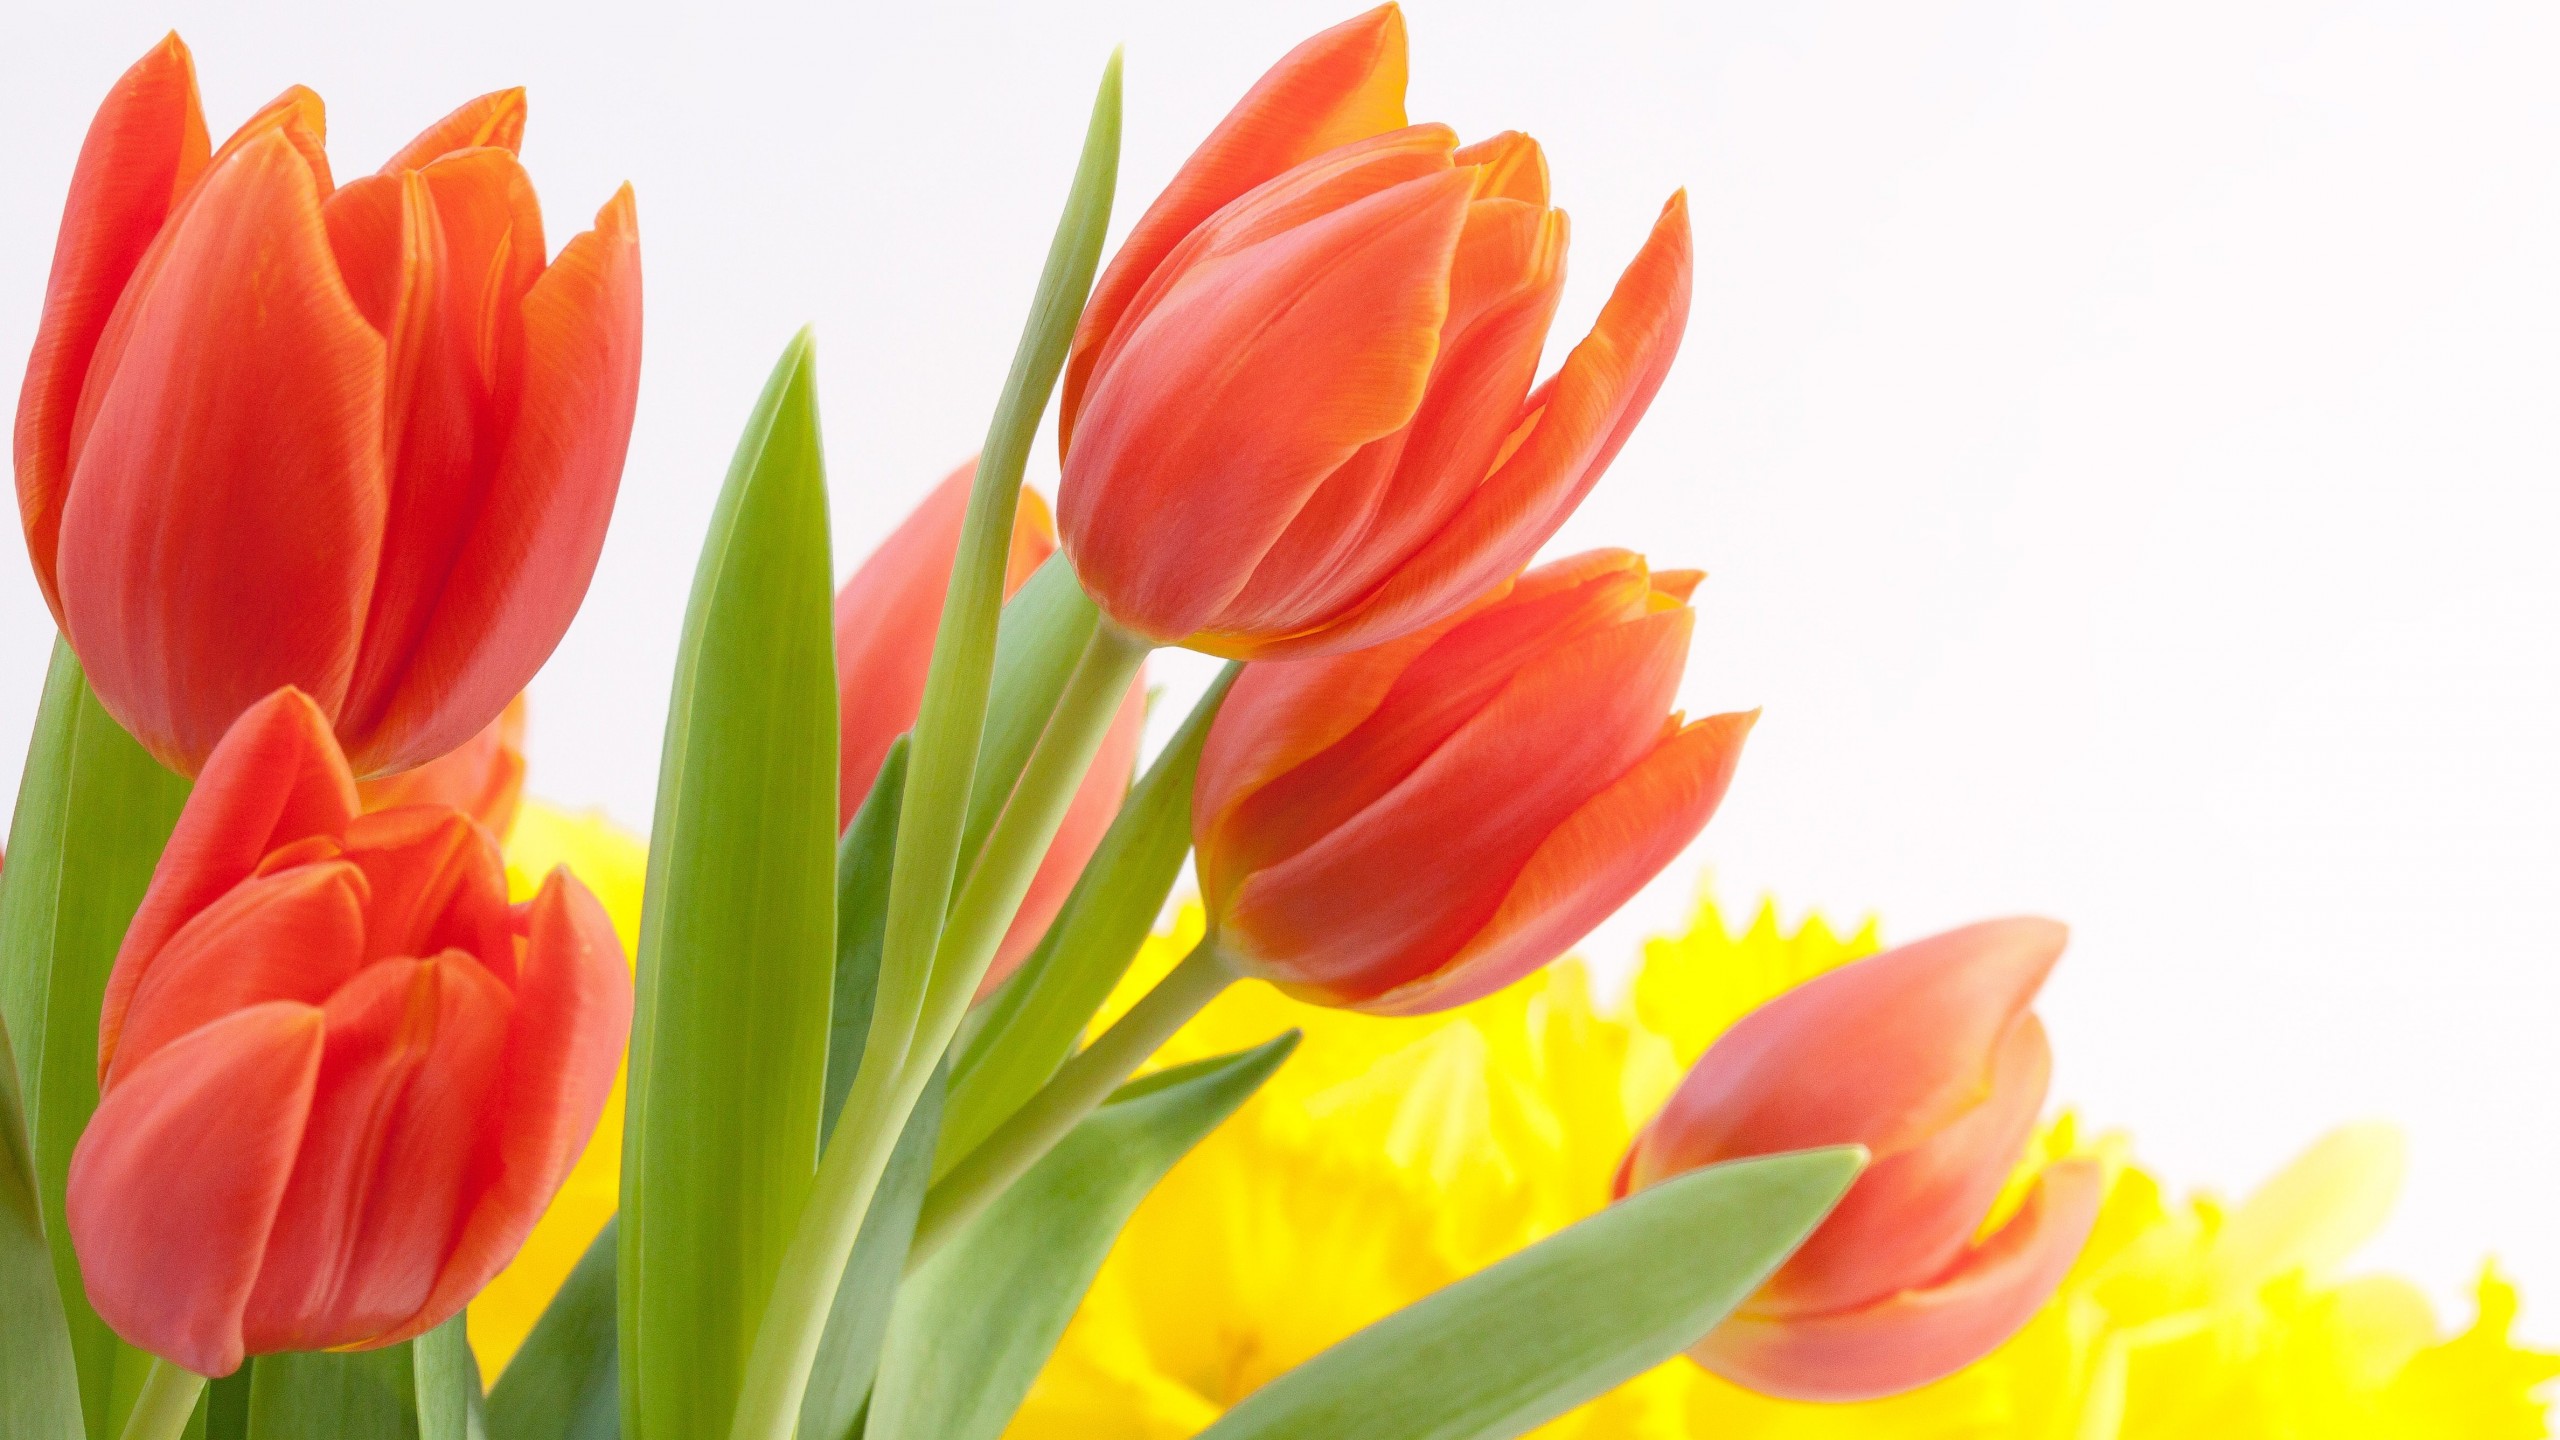 Tulip Flowers HD Wallpapers free download 2560x1440